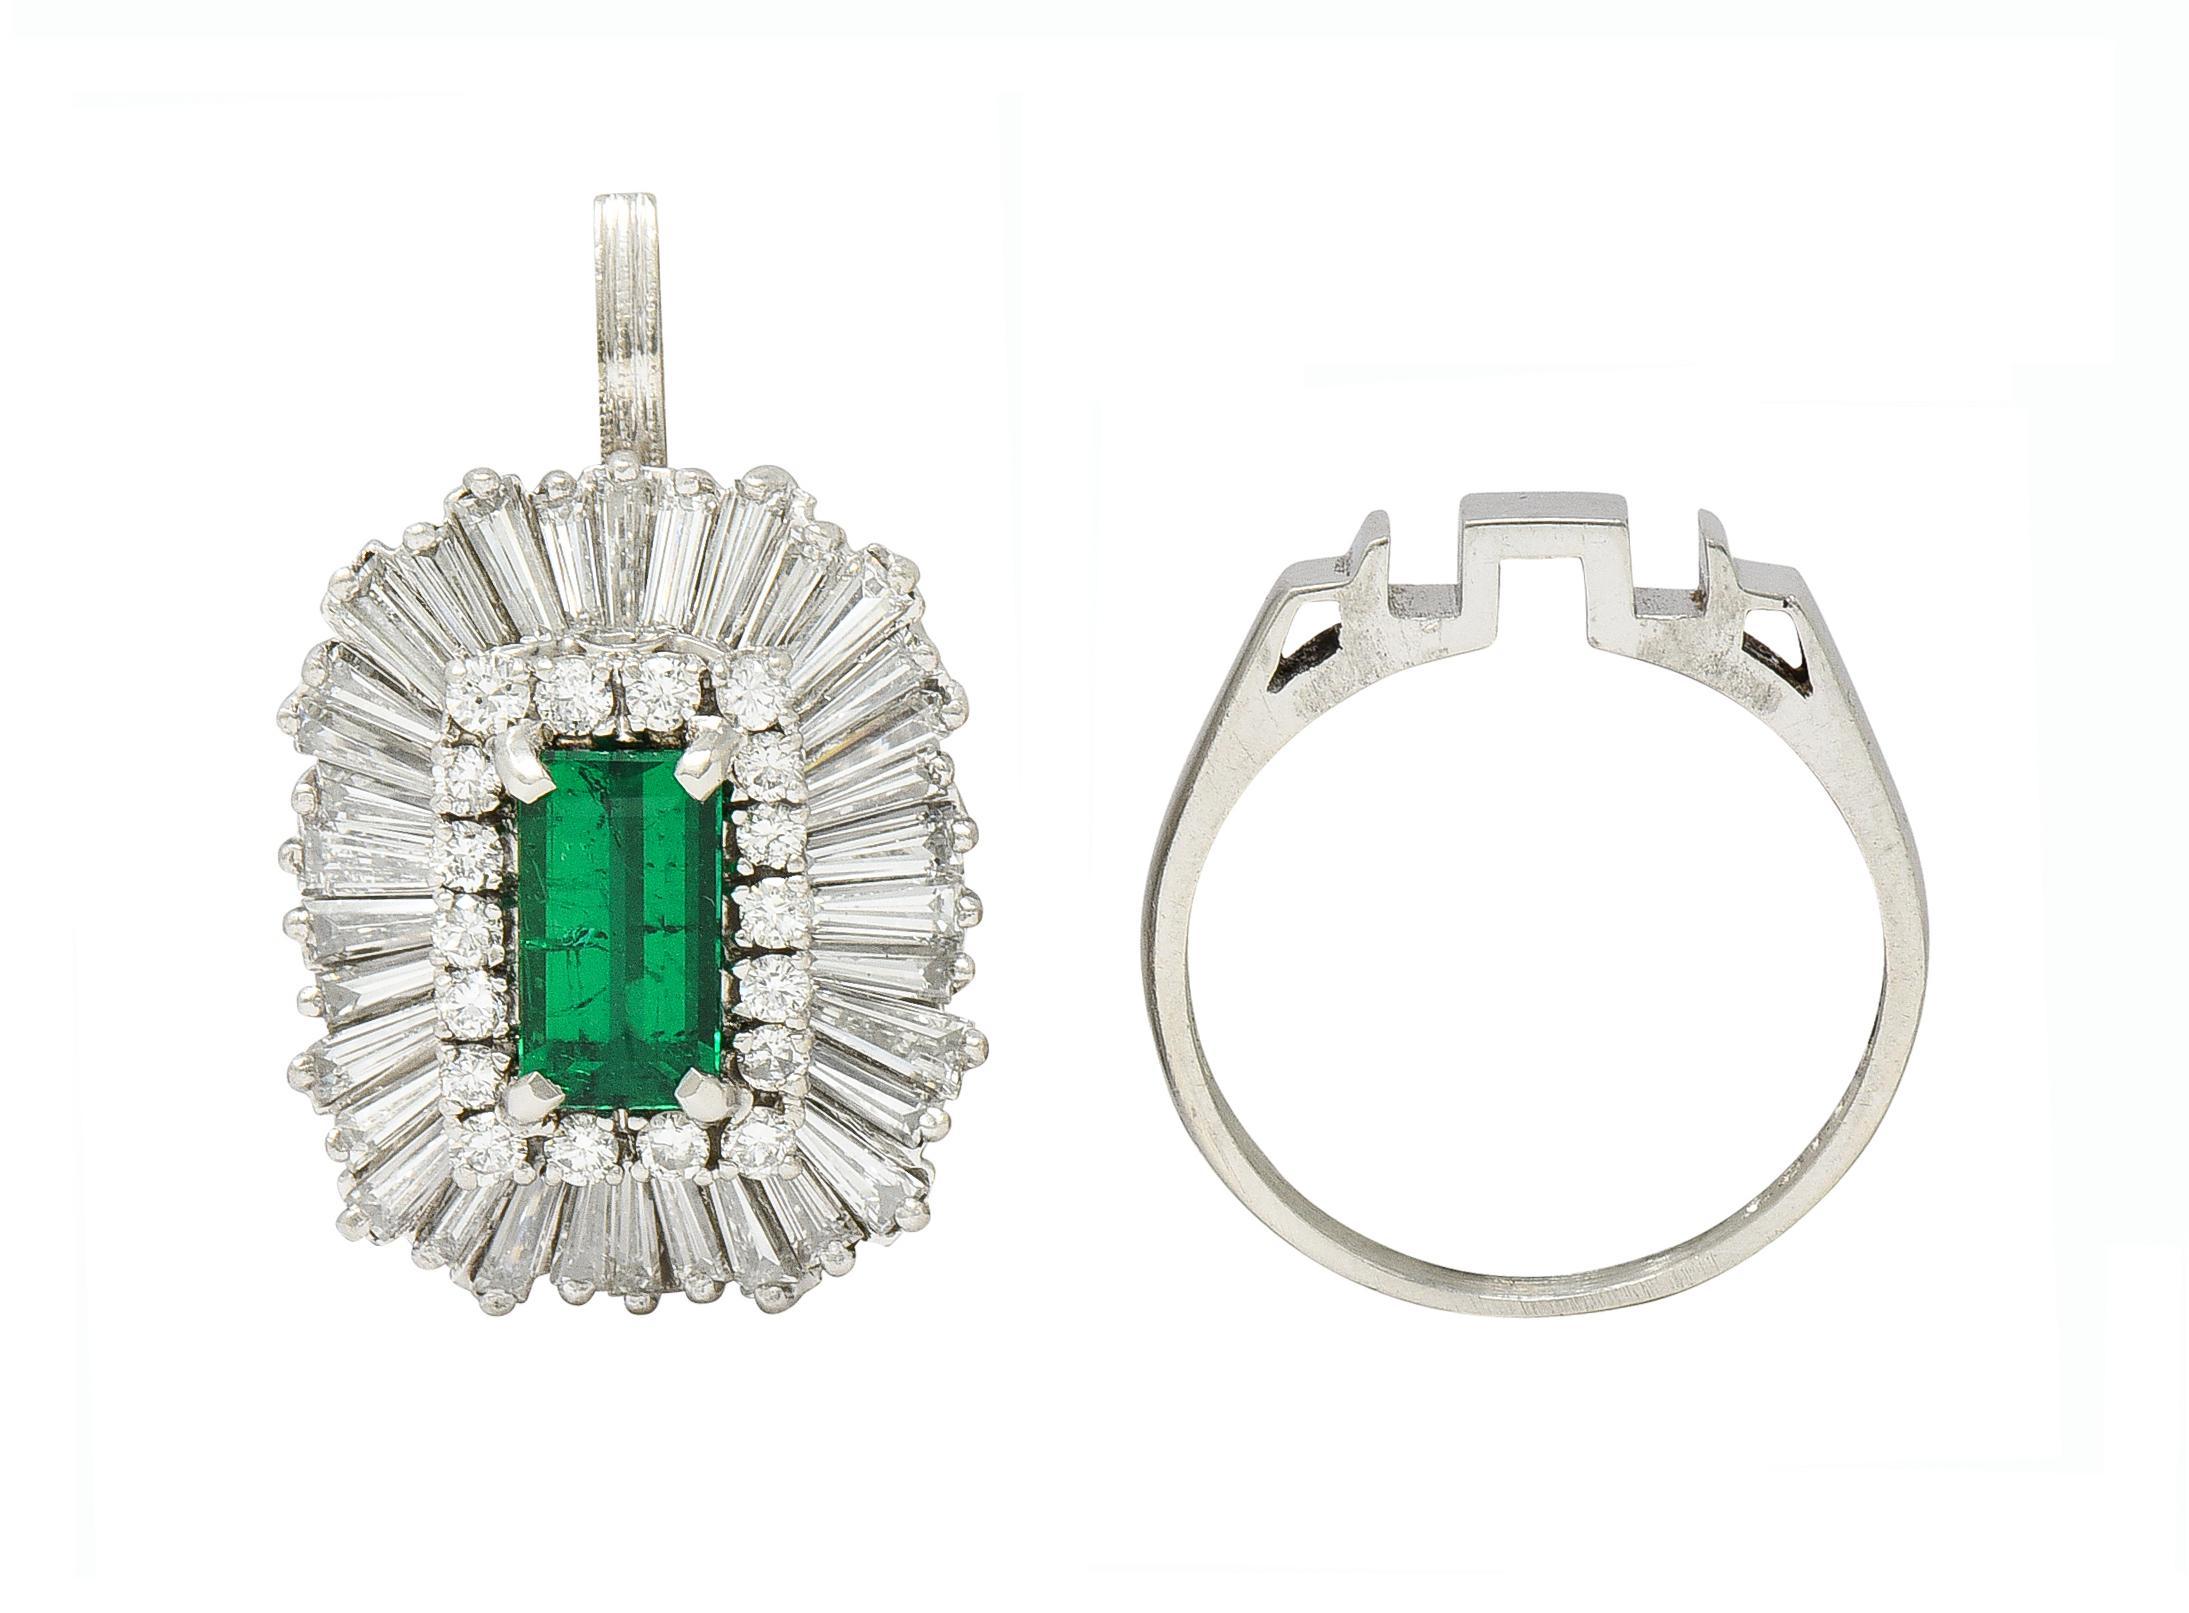 Centering an emerald cut emerald weighing 1.21 carats total - transparent medium green
Natural Colombian in origin with minor clarity enhancement (FI) 
With a halo surround of round brilliant and single cut diamonds 
Weighing approximately 0.45